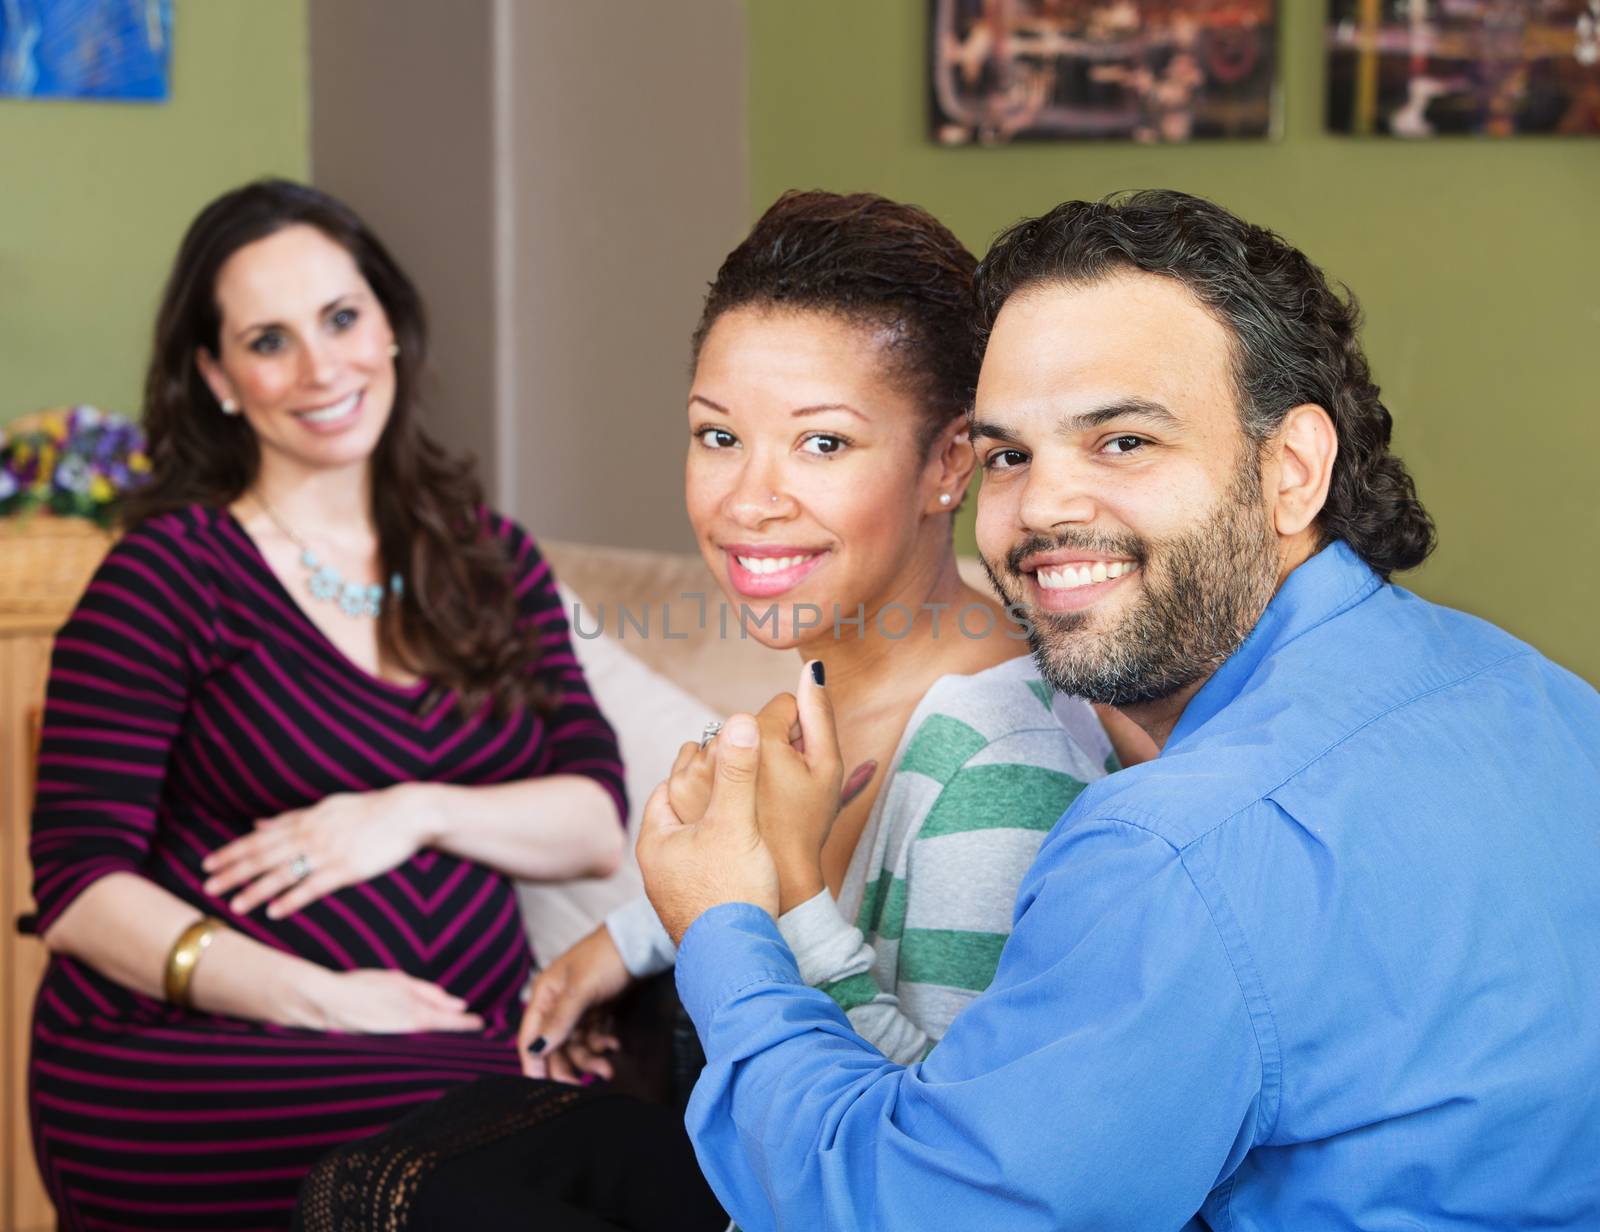 Hispanic Couple with Surrogate Mother by Creatista